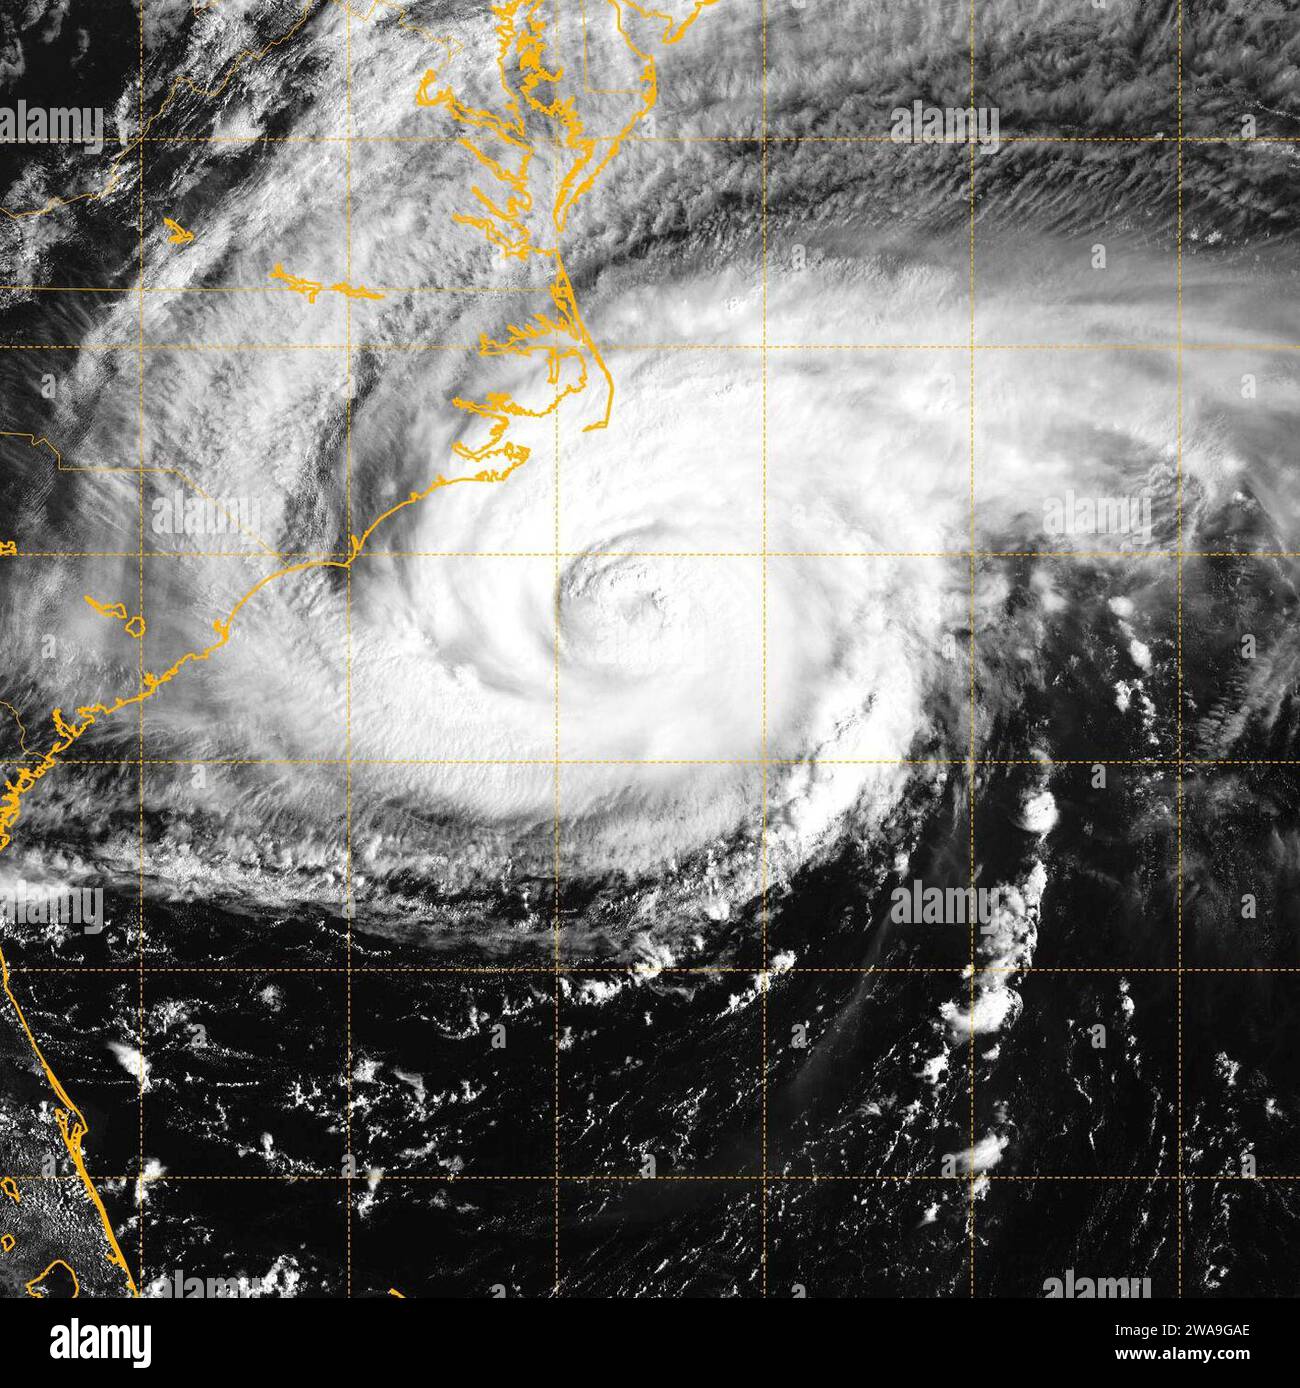 US military forces. WASHINGTON (Sept. 13, 2018) A satellite image of the Atlantic Ocean from the GOES 16 Advanced Baseline Imager showing Hurricane Florence at 7:45 a.m. EST. Florence is currently a Category 2 hurricane with maximum sustained winds at 105 mph. The center of the storm at 11:00 a.m. EST was 145 miles east-southeast of Wilmington, N.C., moving northwest at 10 mph. (U.S. Navy photo via NRL/Released) Stock Photo